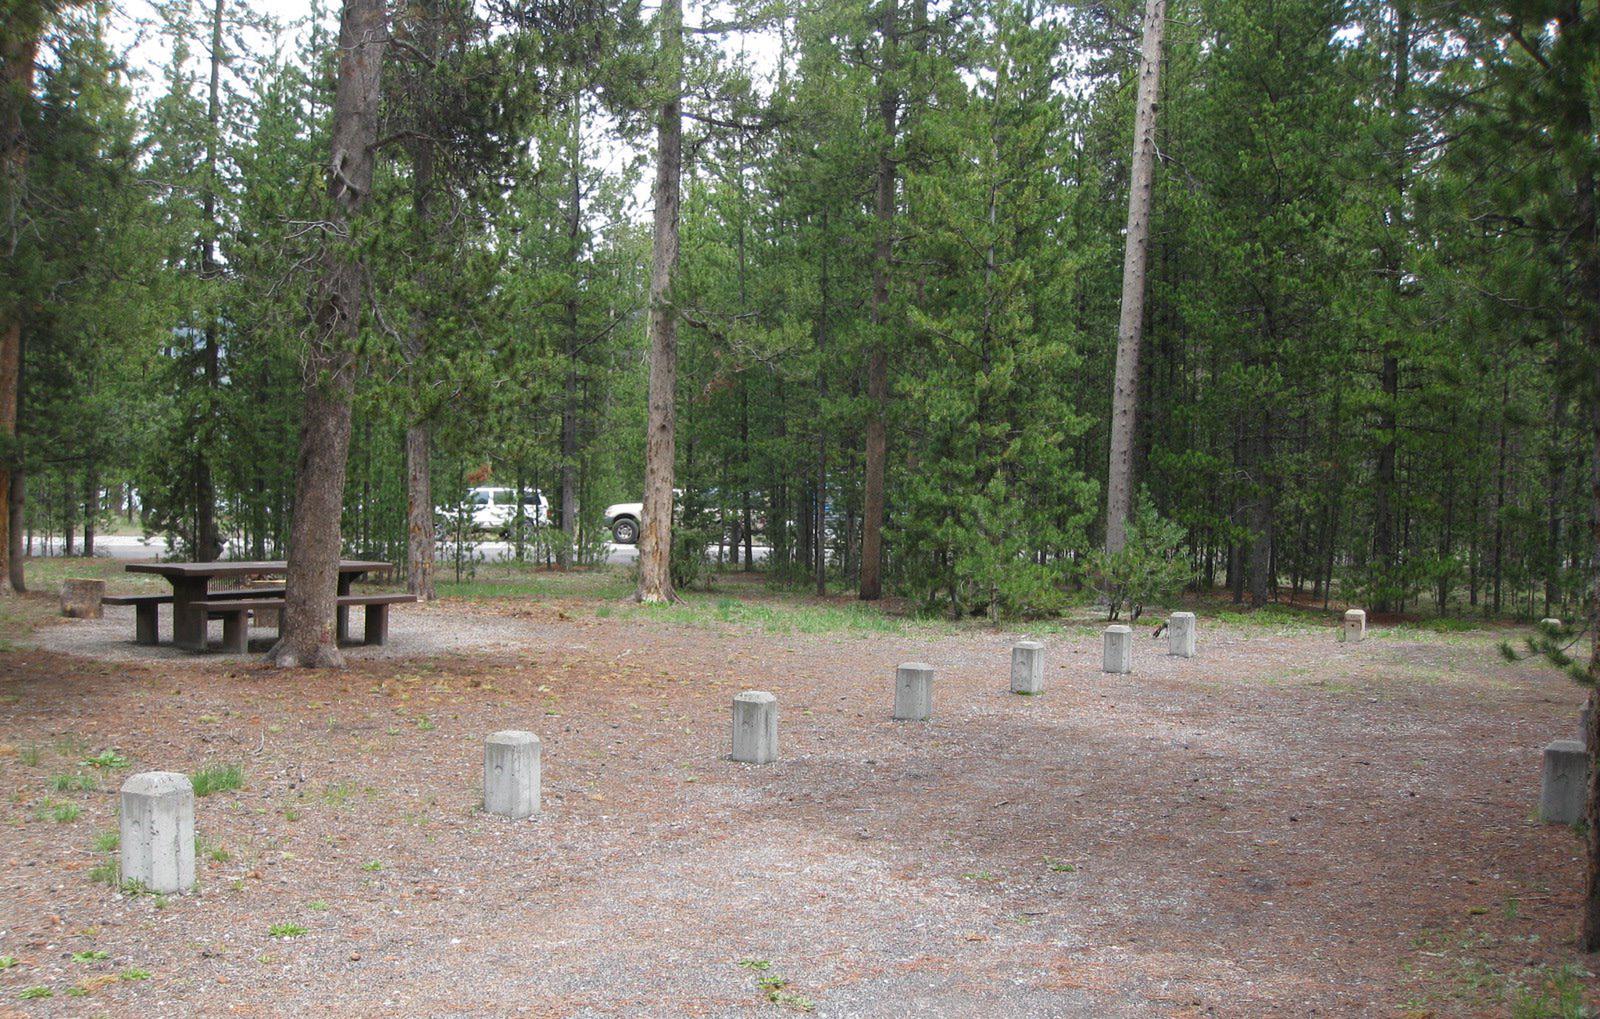 Site A19, surrounded by pine trees, picnic table & fire ringSite A19